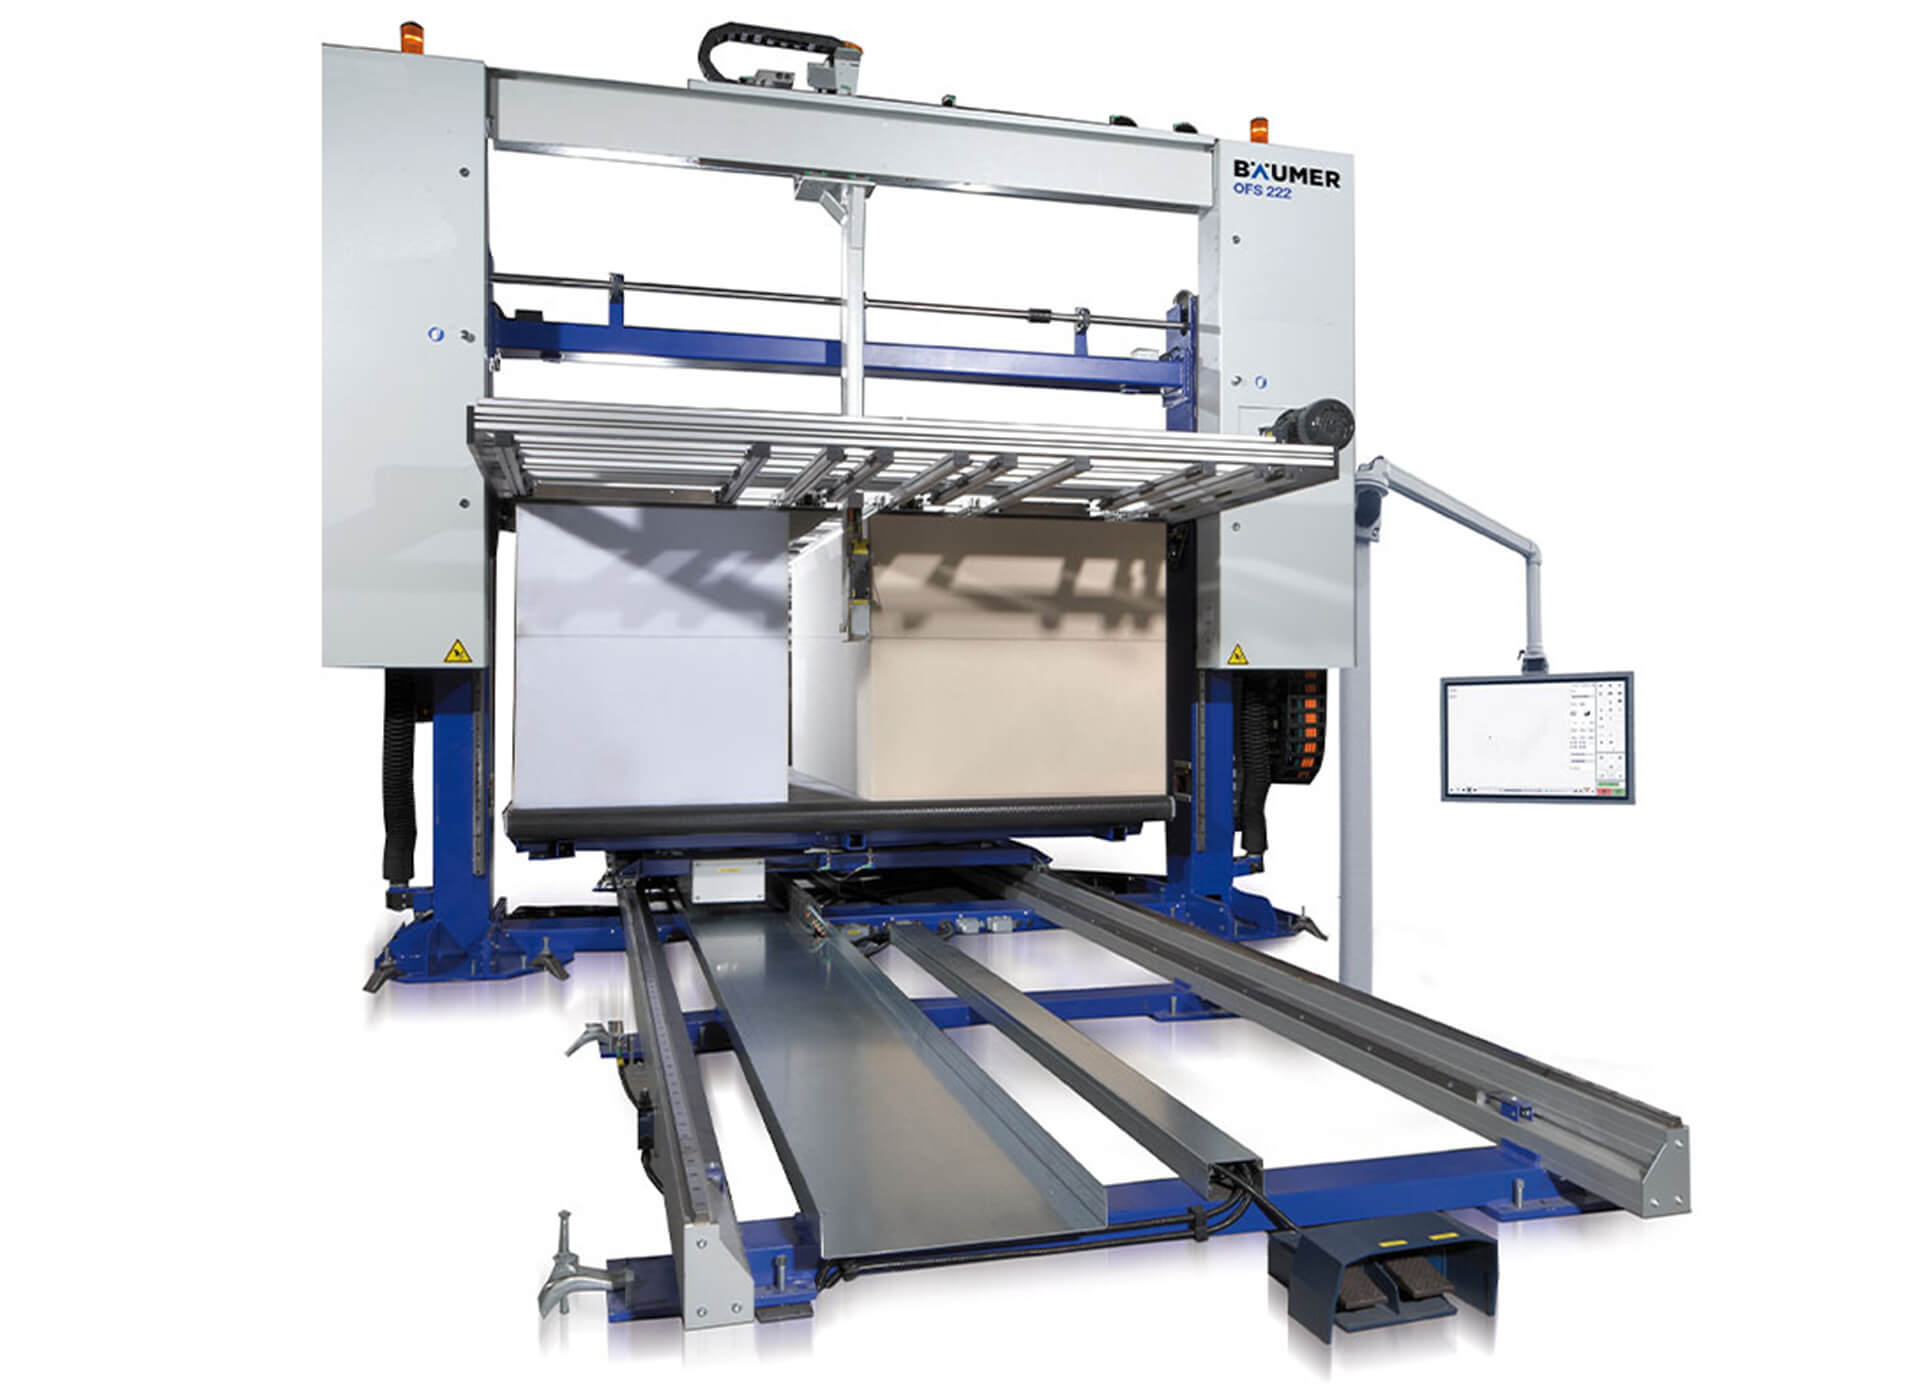 The horizontal contour cutting machine with knife for foam